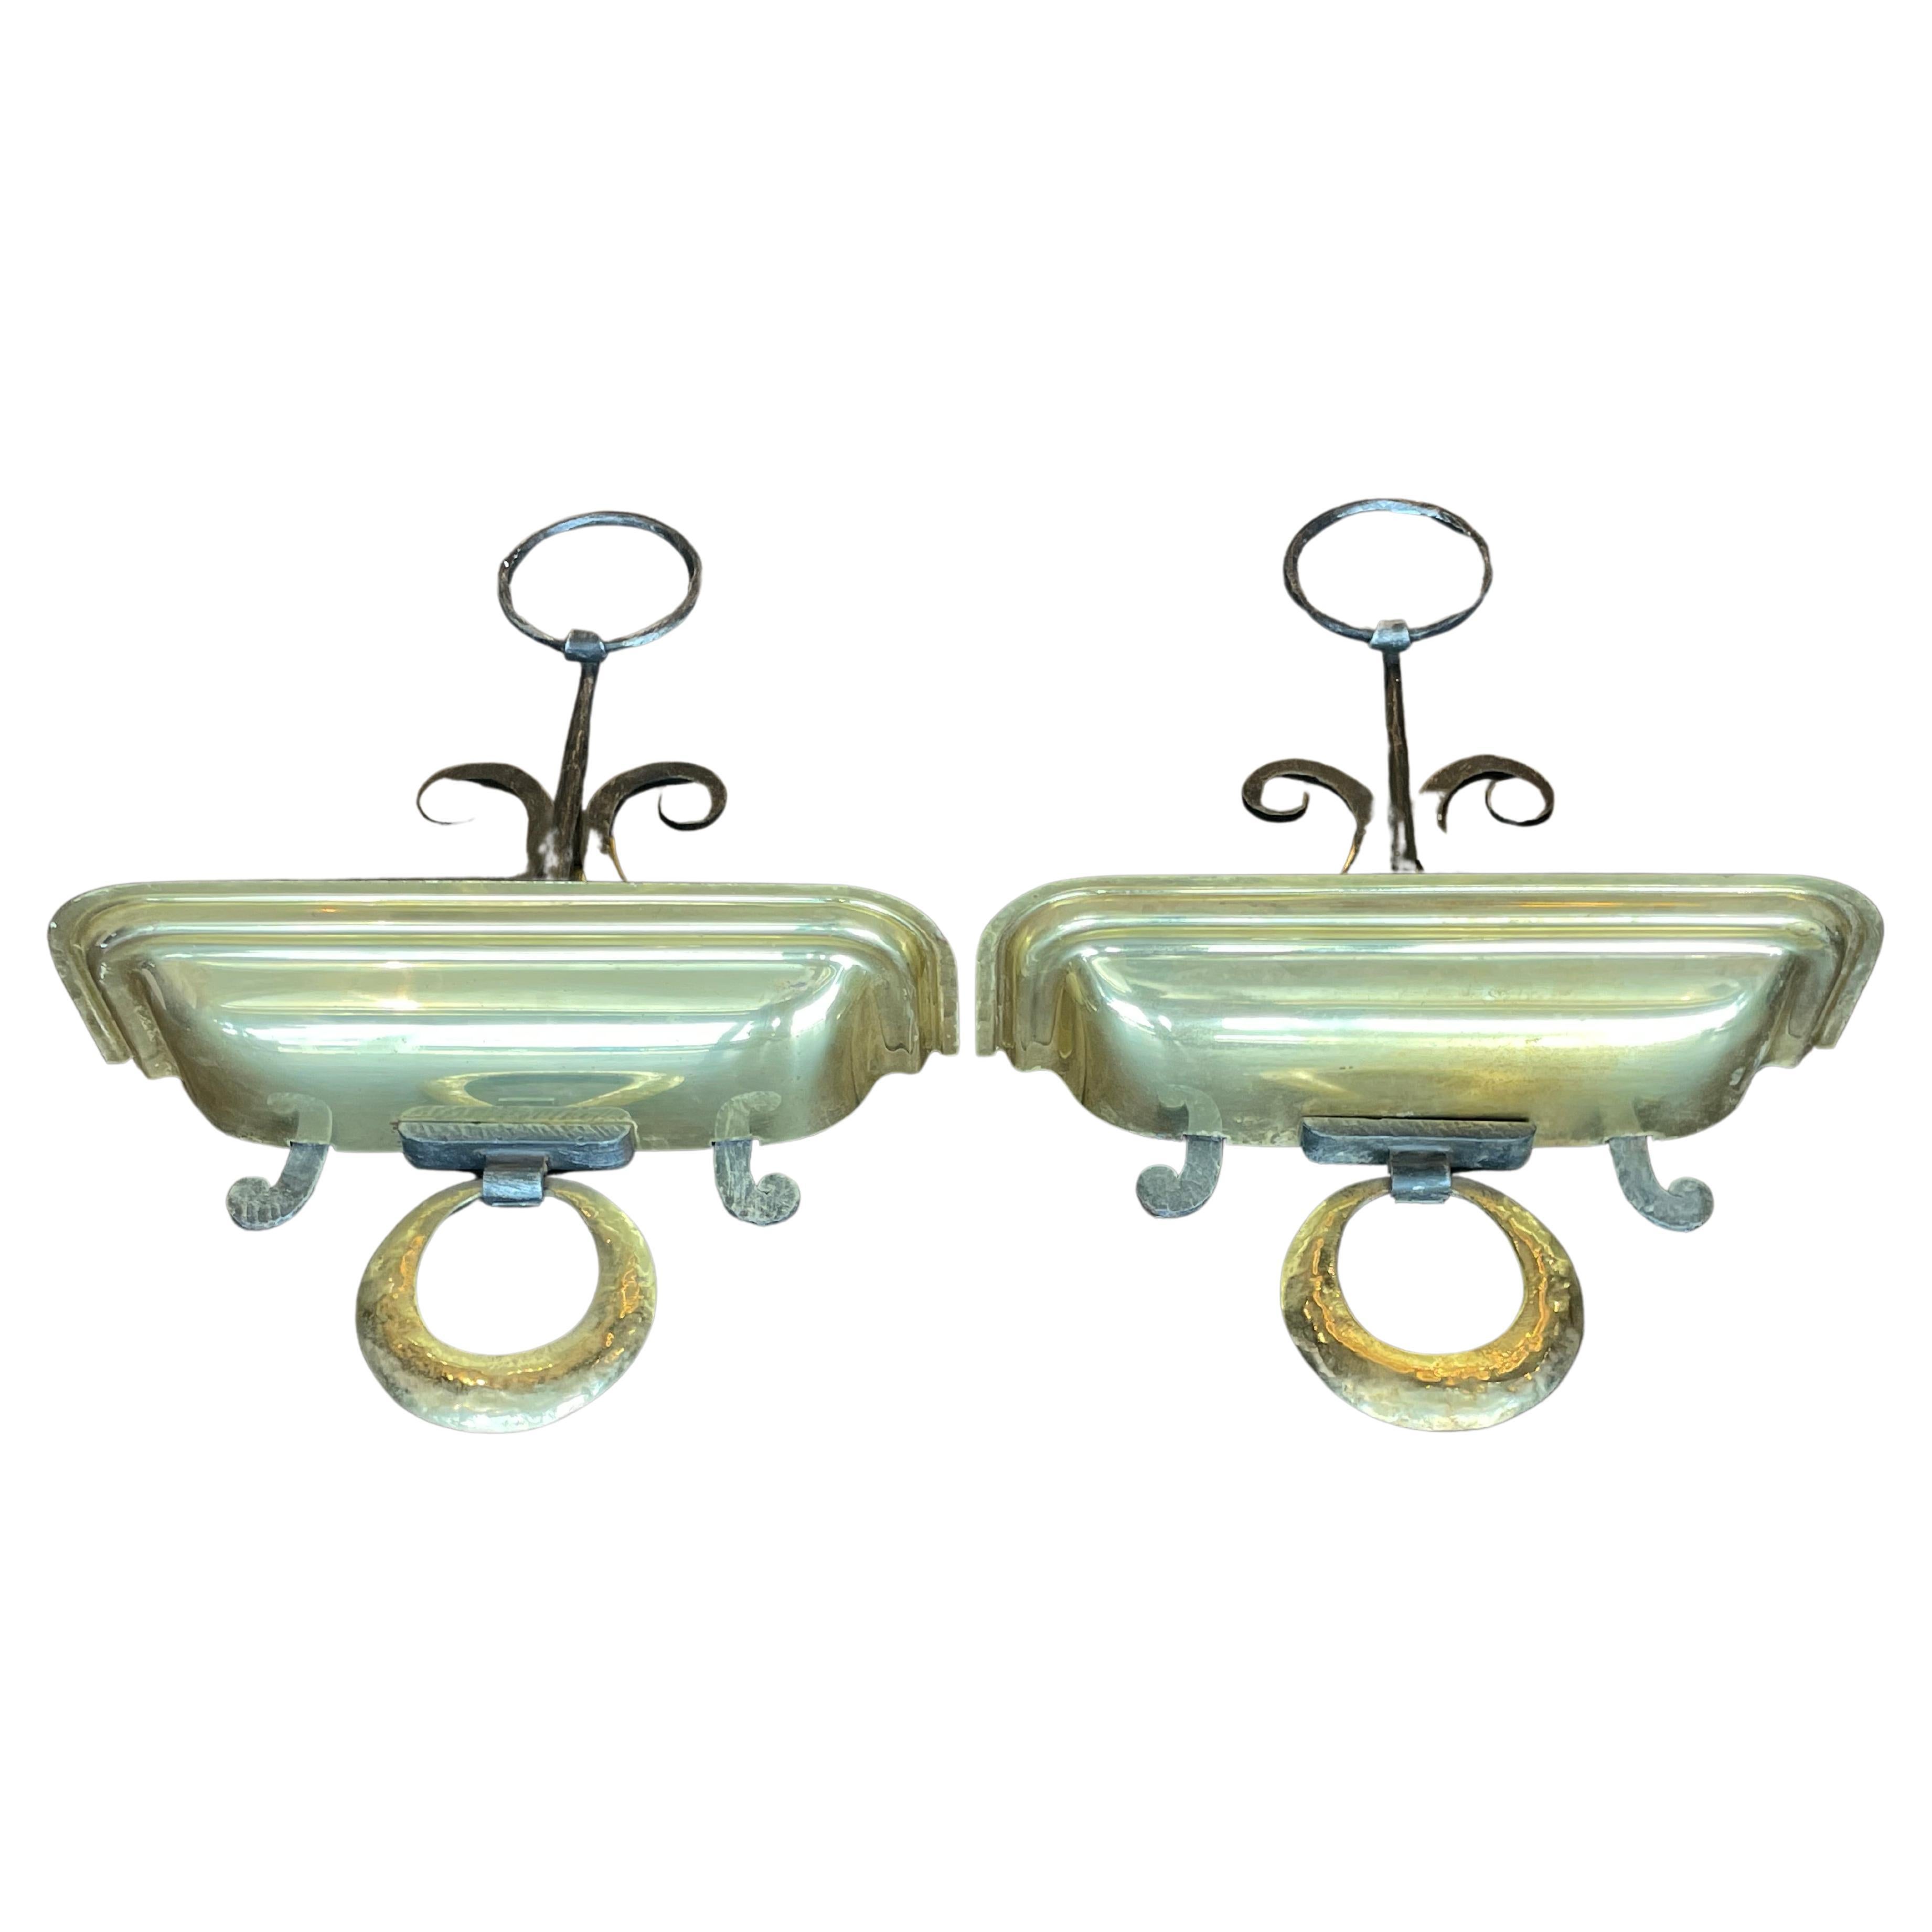 English Brass-Plated Sconces In Excellent Condition For Sale In West Hollywood, CA